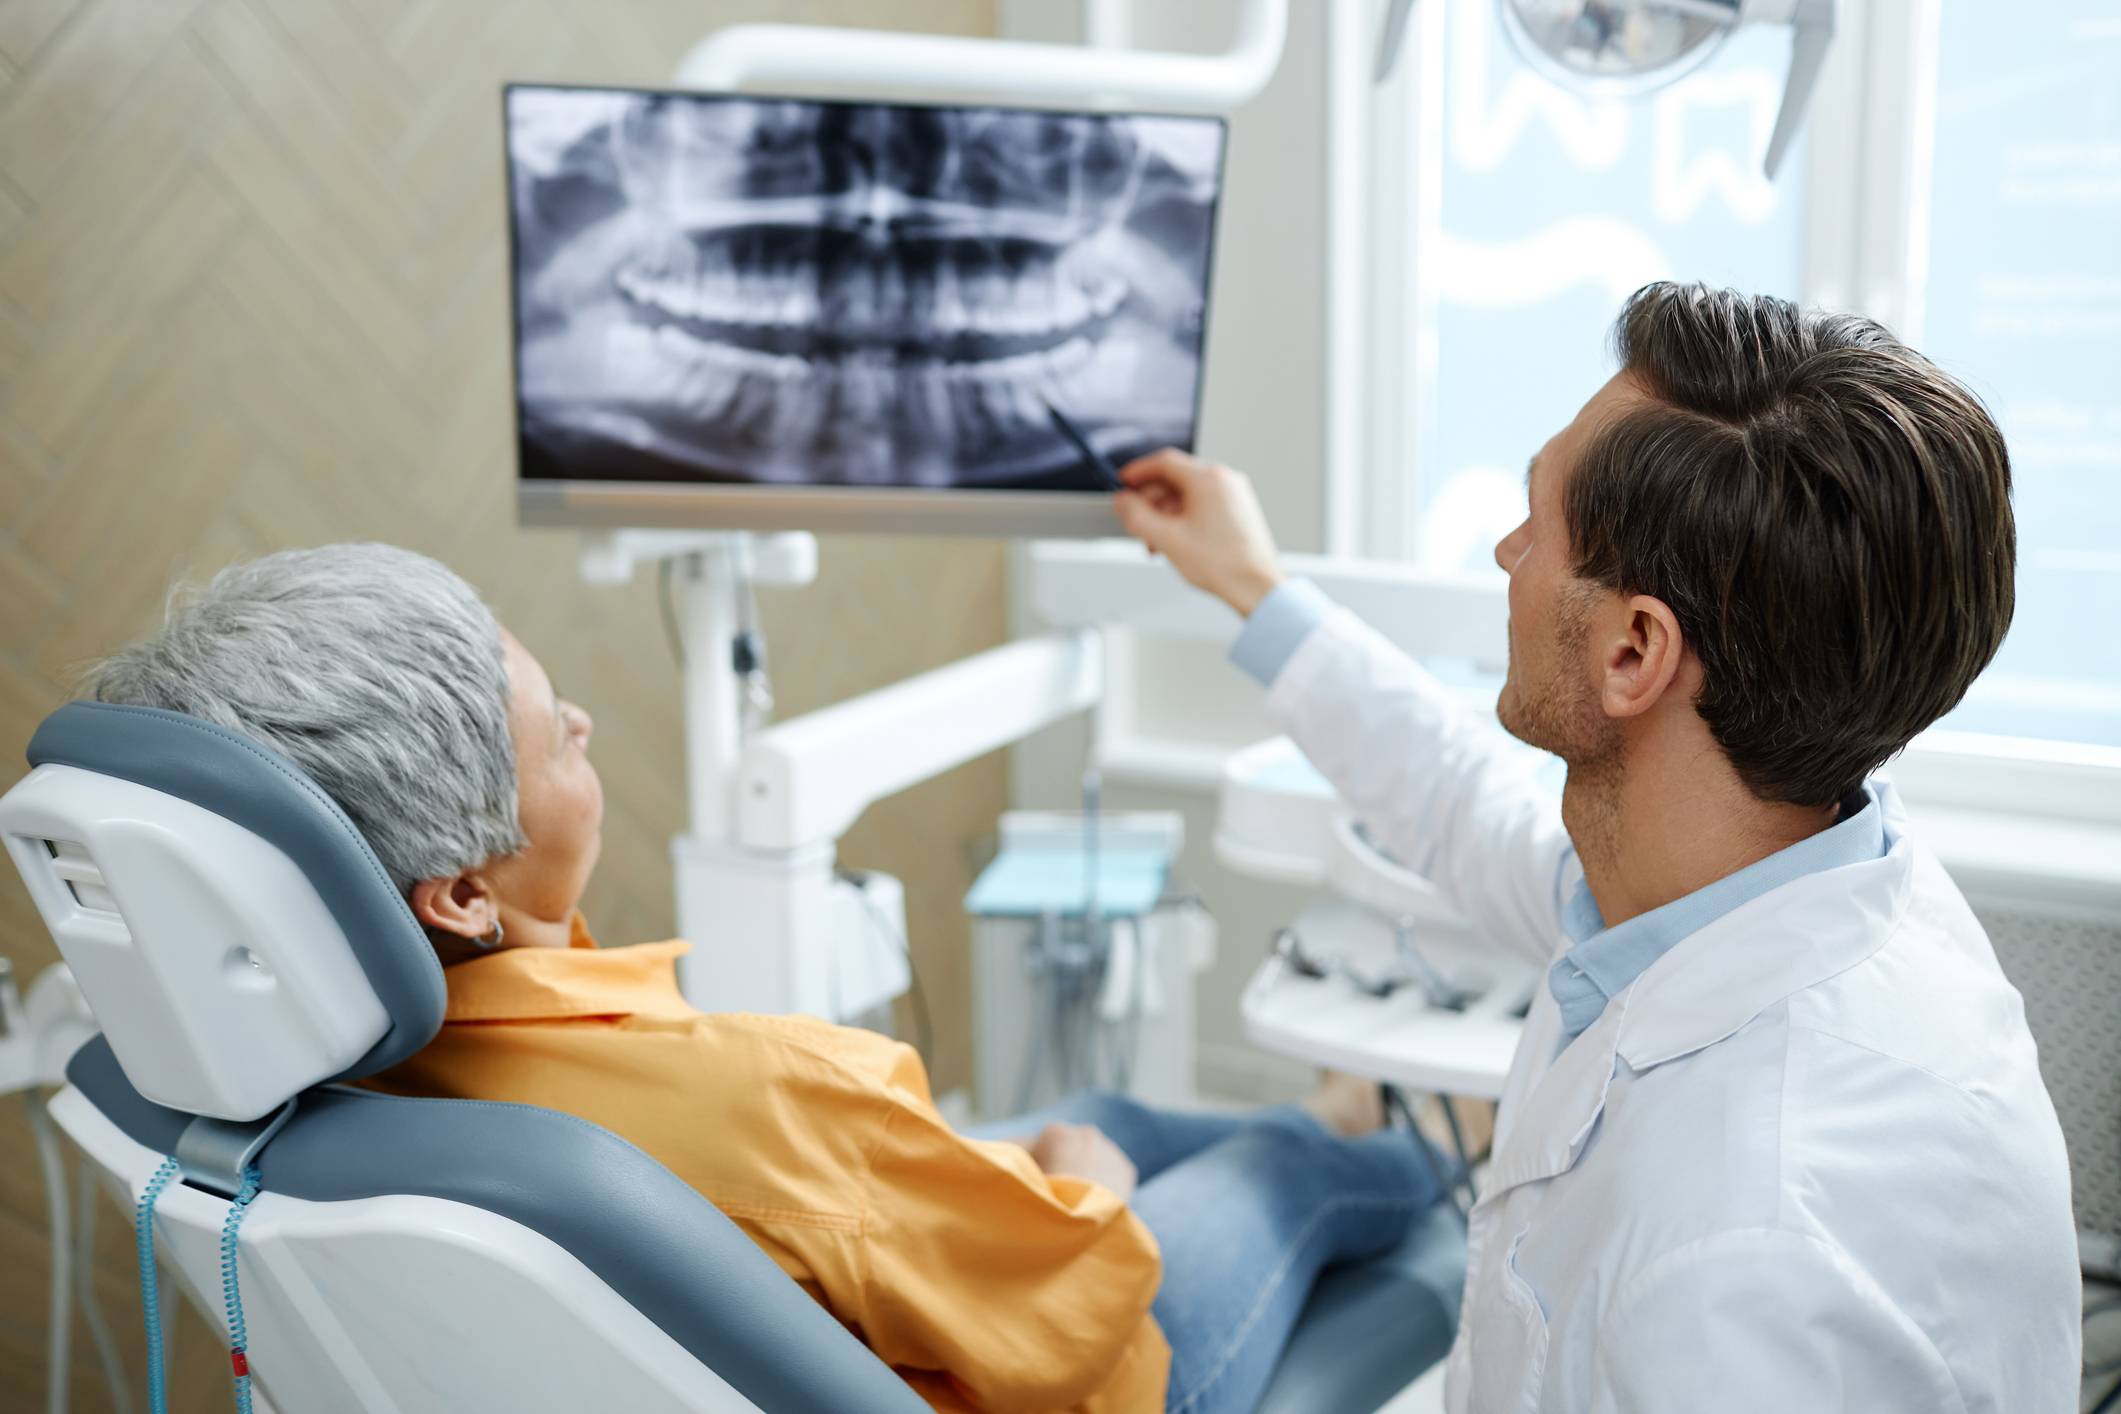 Finding full coverage dental insurance that fits your needs